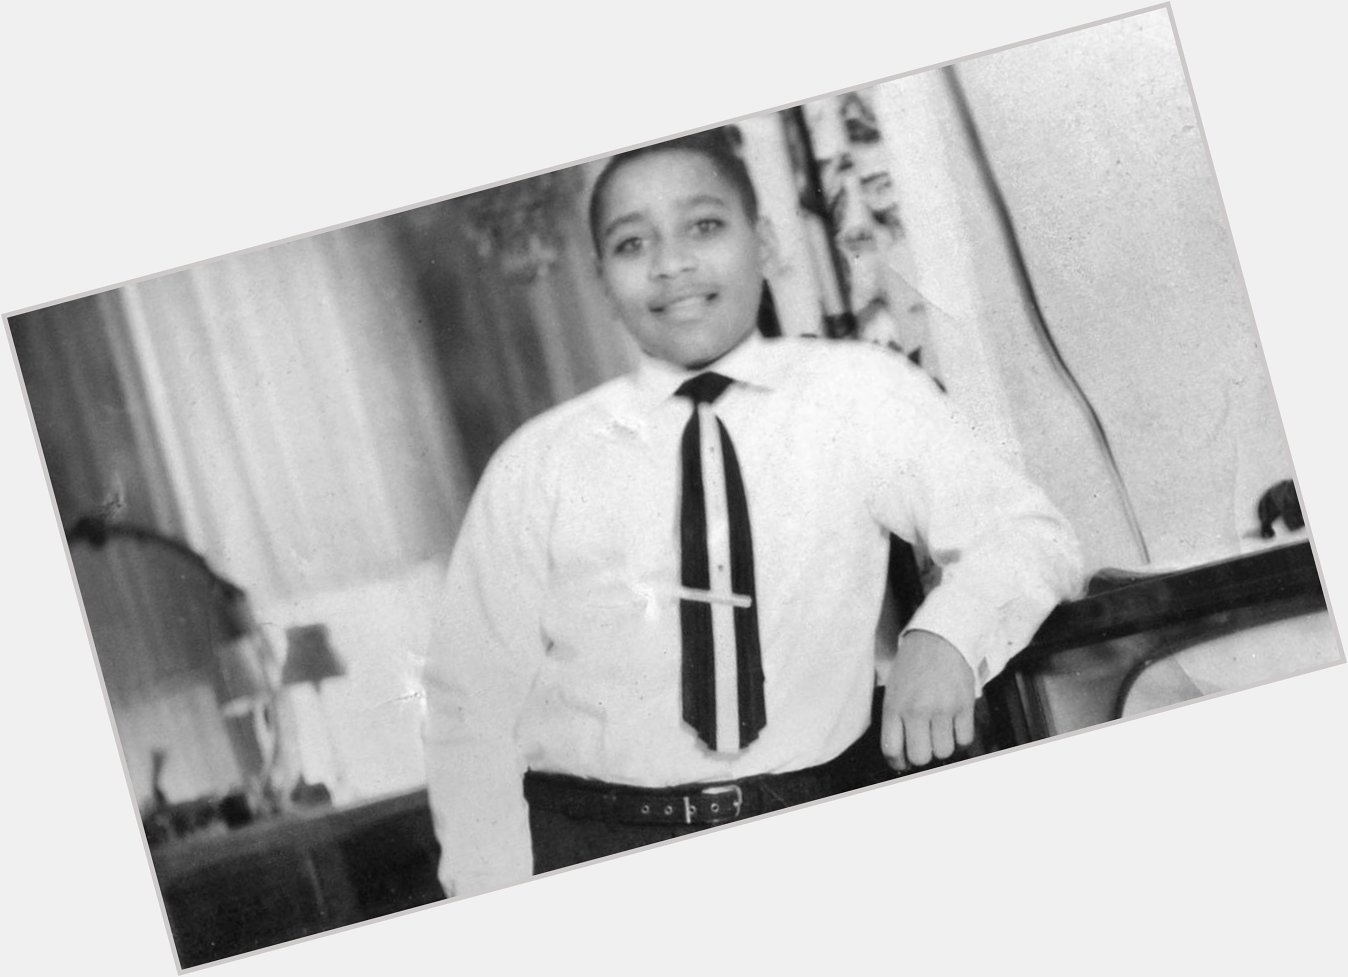 Emmett Till would ve been 78 today. 

Happy Birthday King 